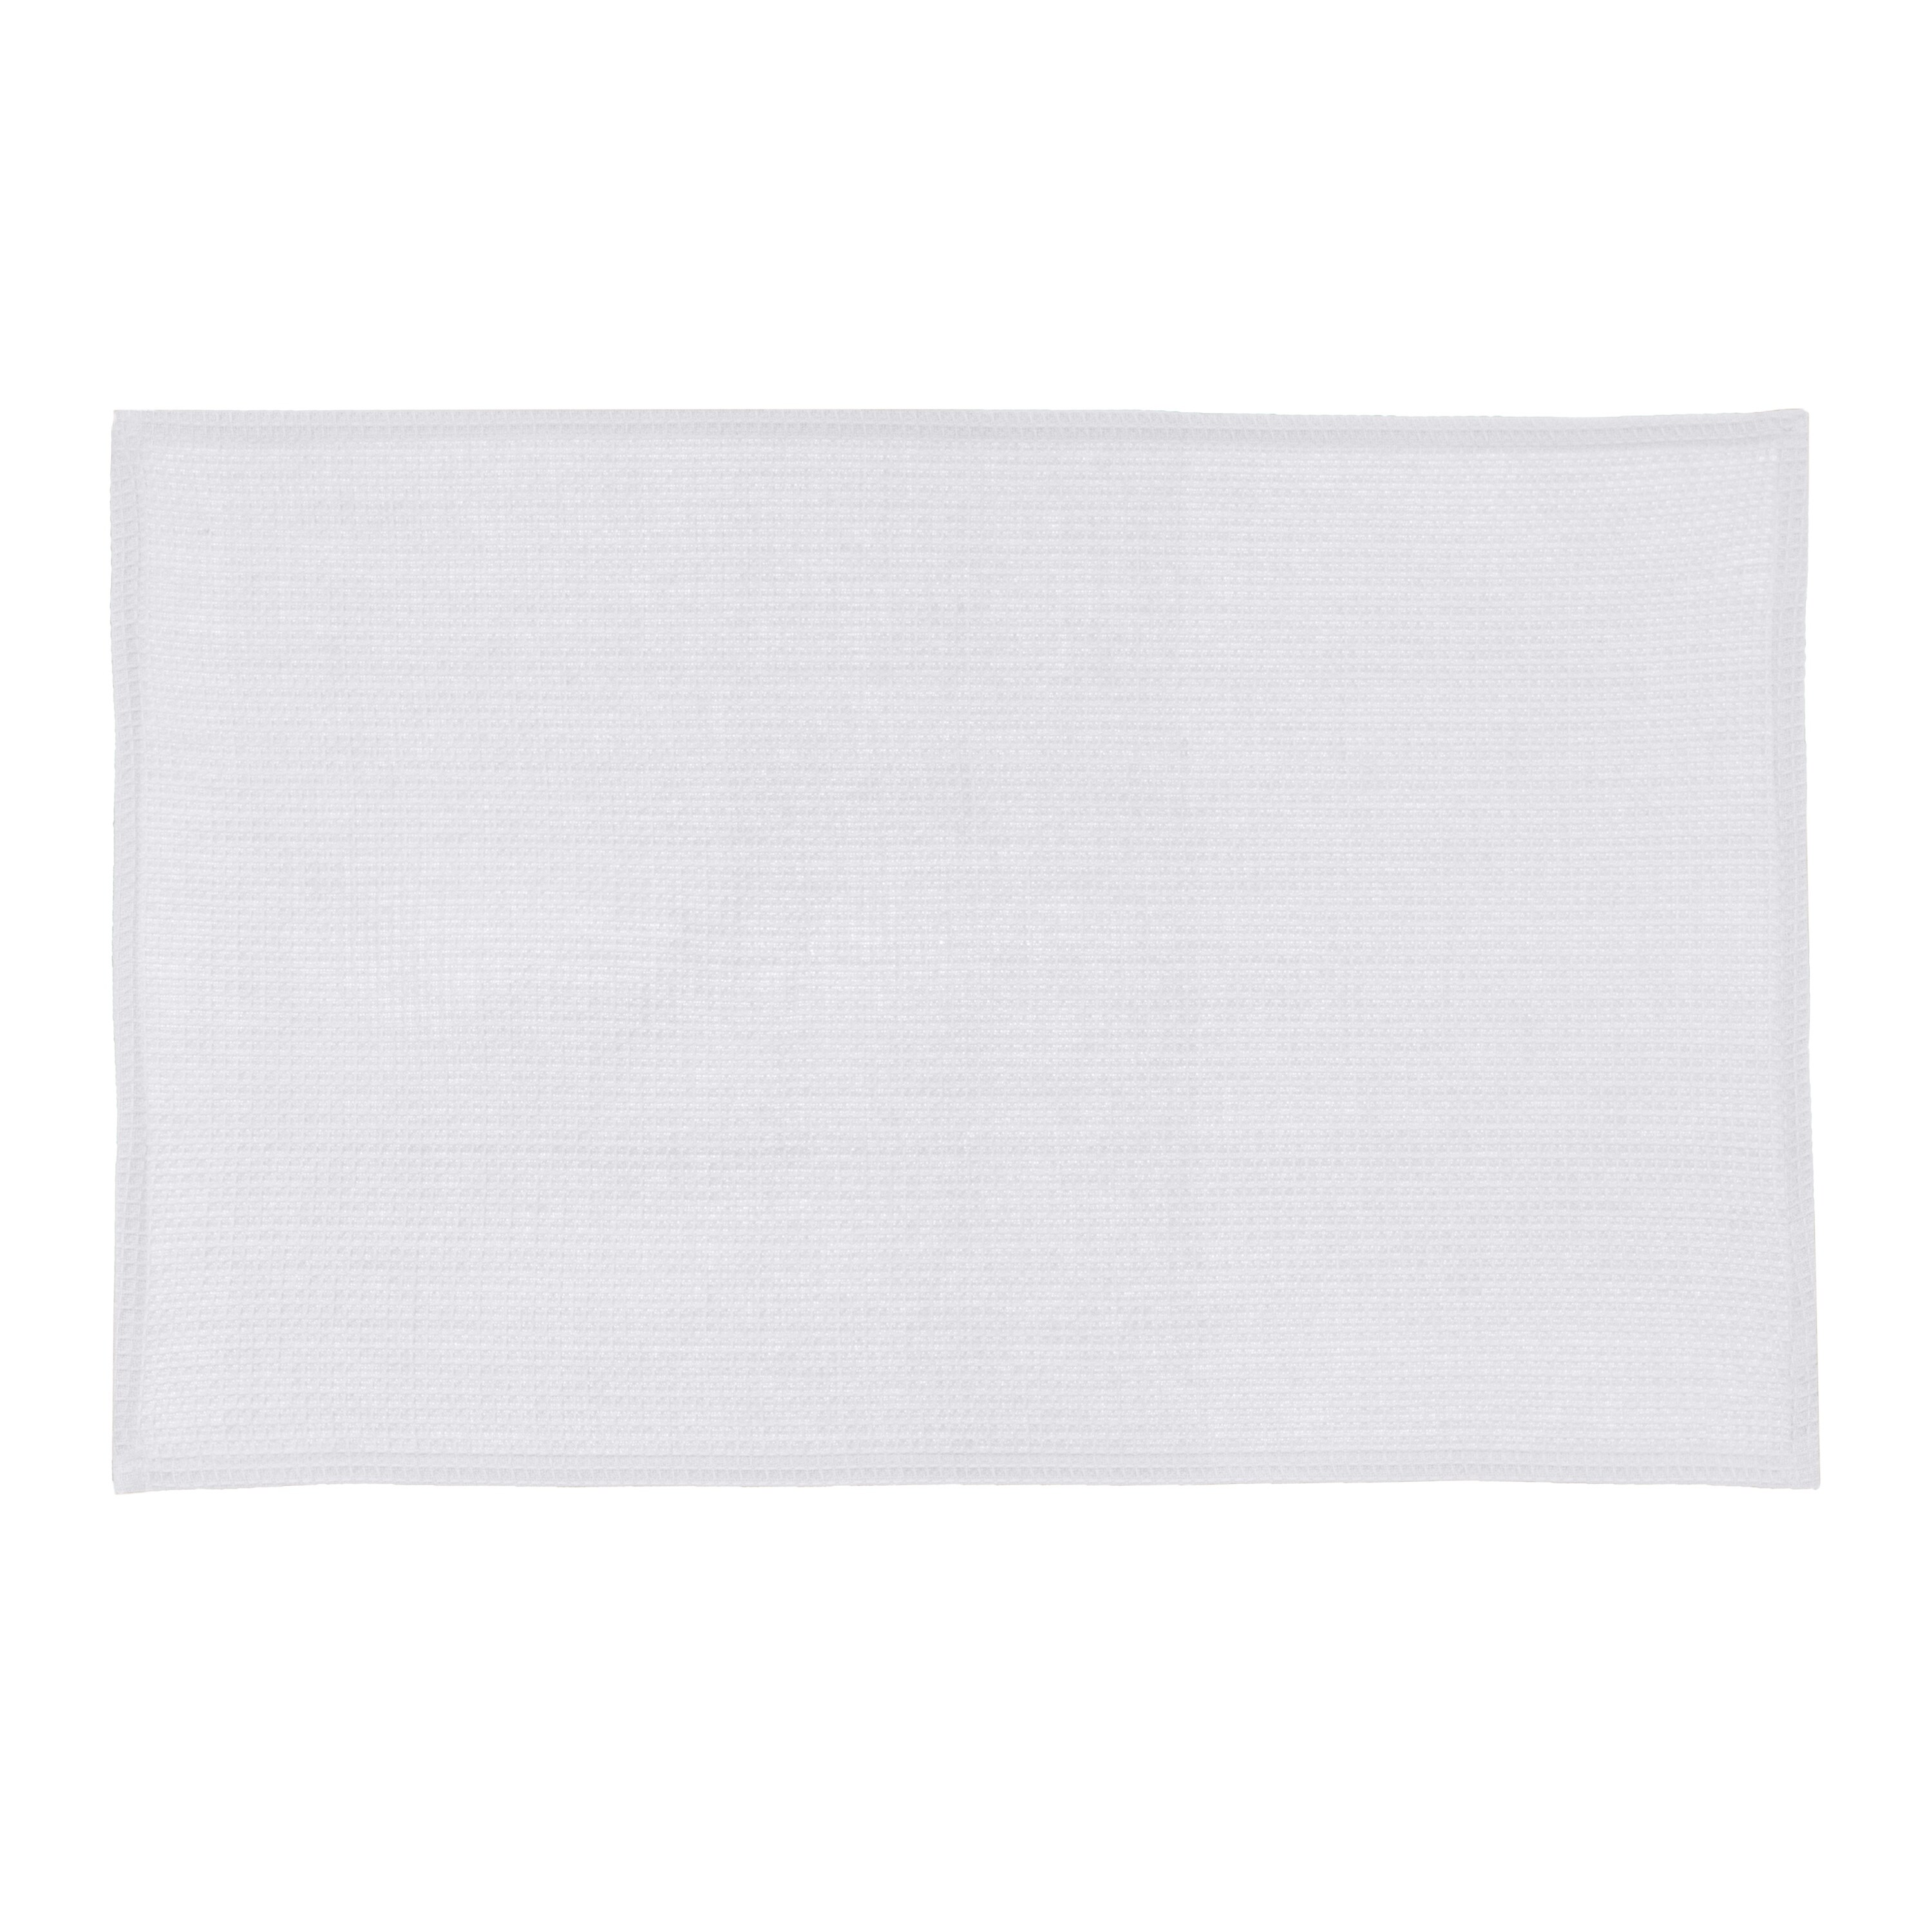 https://ak1.ostkcdn.com/images/products/is/images/direct/81e6f2021bb8156fe880066daafcafc9b20431d2/Fabstyles-Broadway-Waffle-Cotton-Kitchen-Towels.jpg